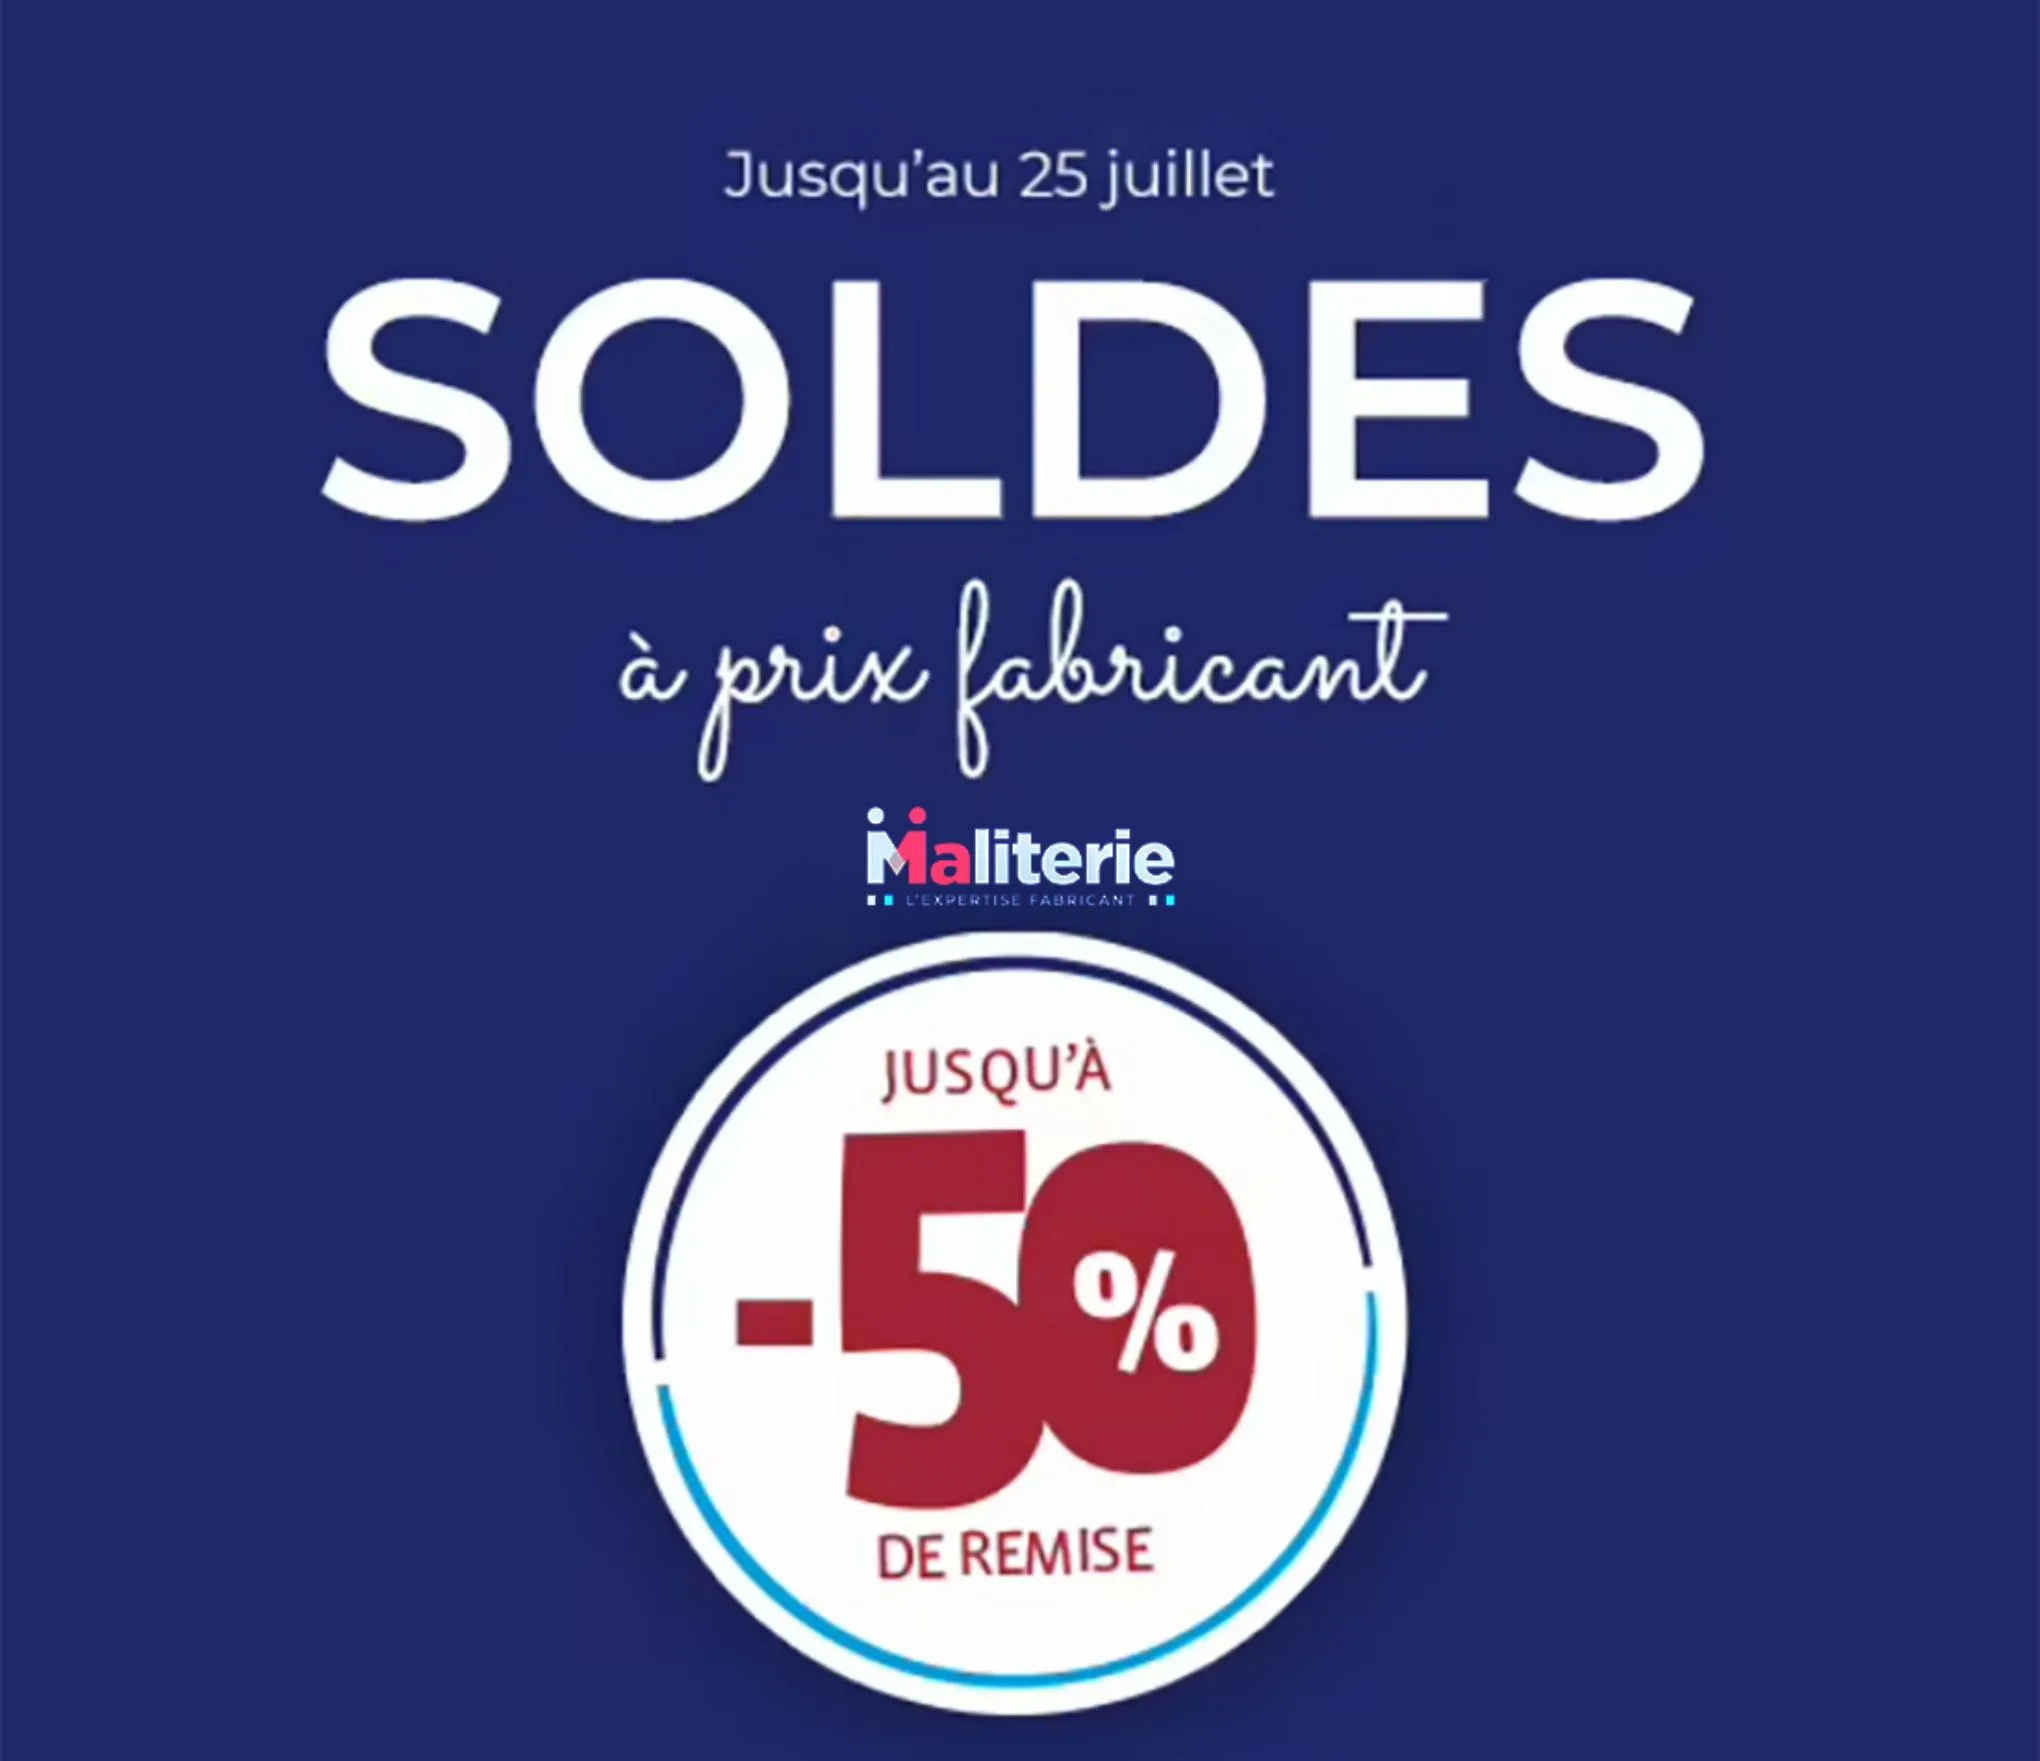 Catalogue Soldes a prix fabricant, page 00001